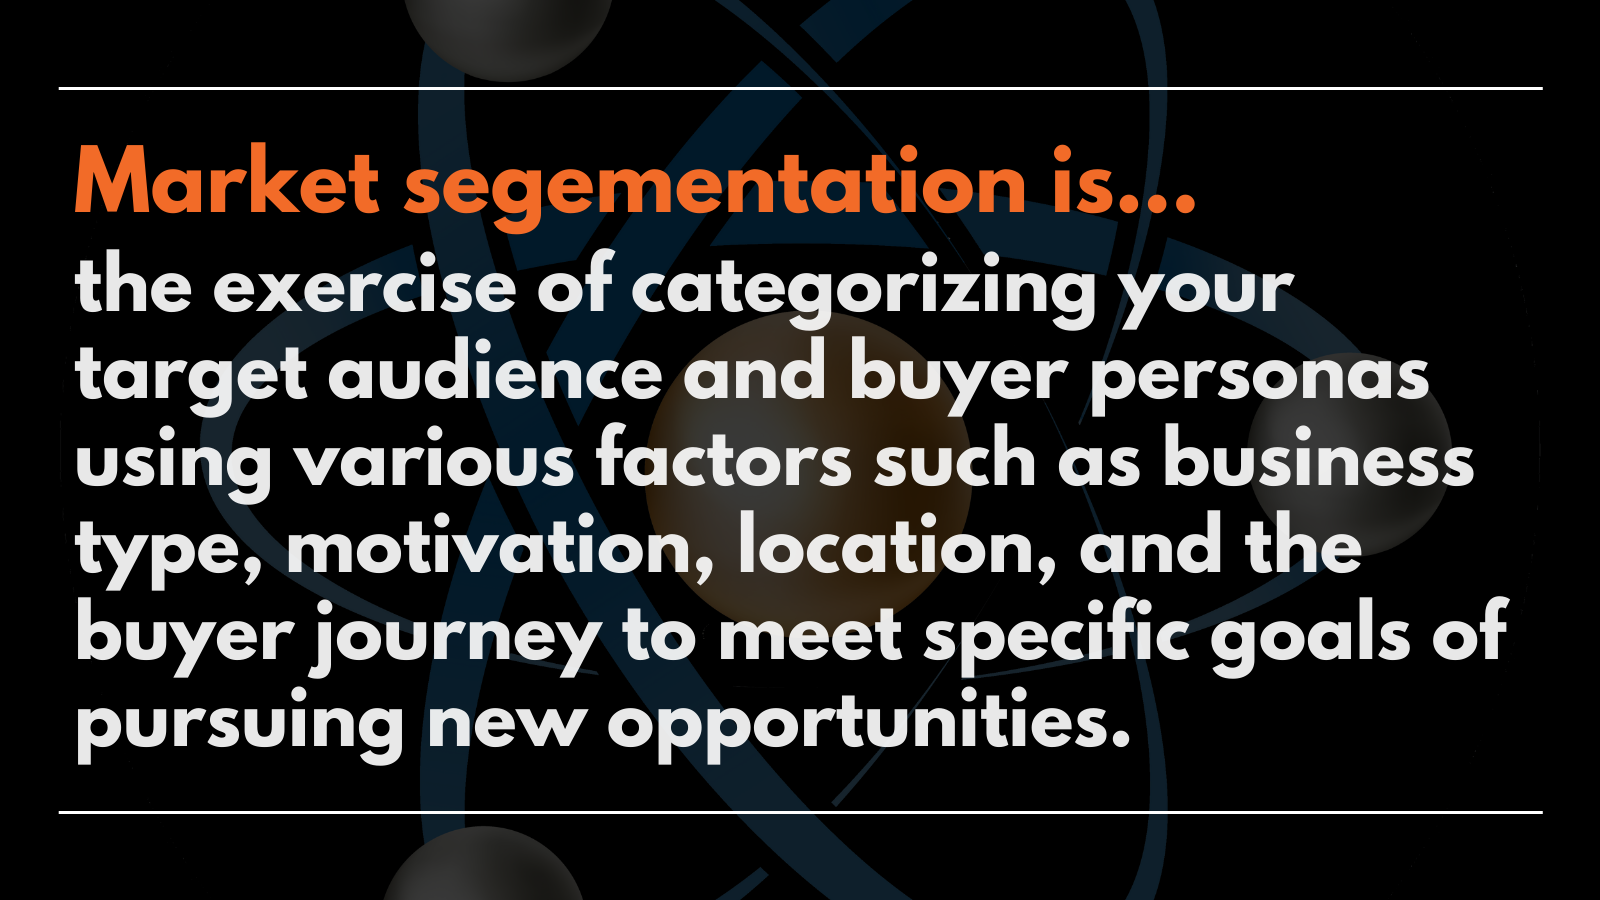 Market Segmentation - What is it and why is it Important